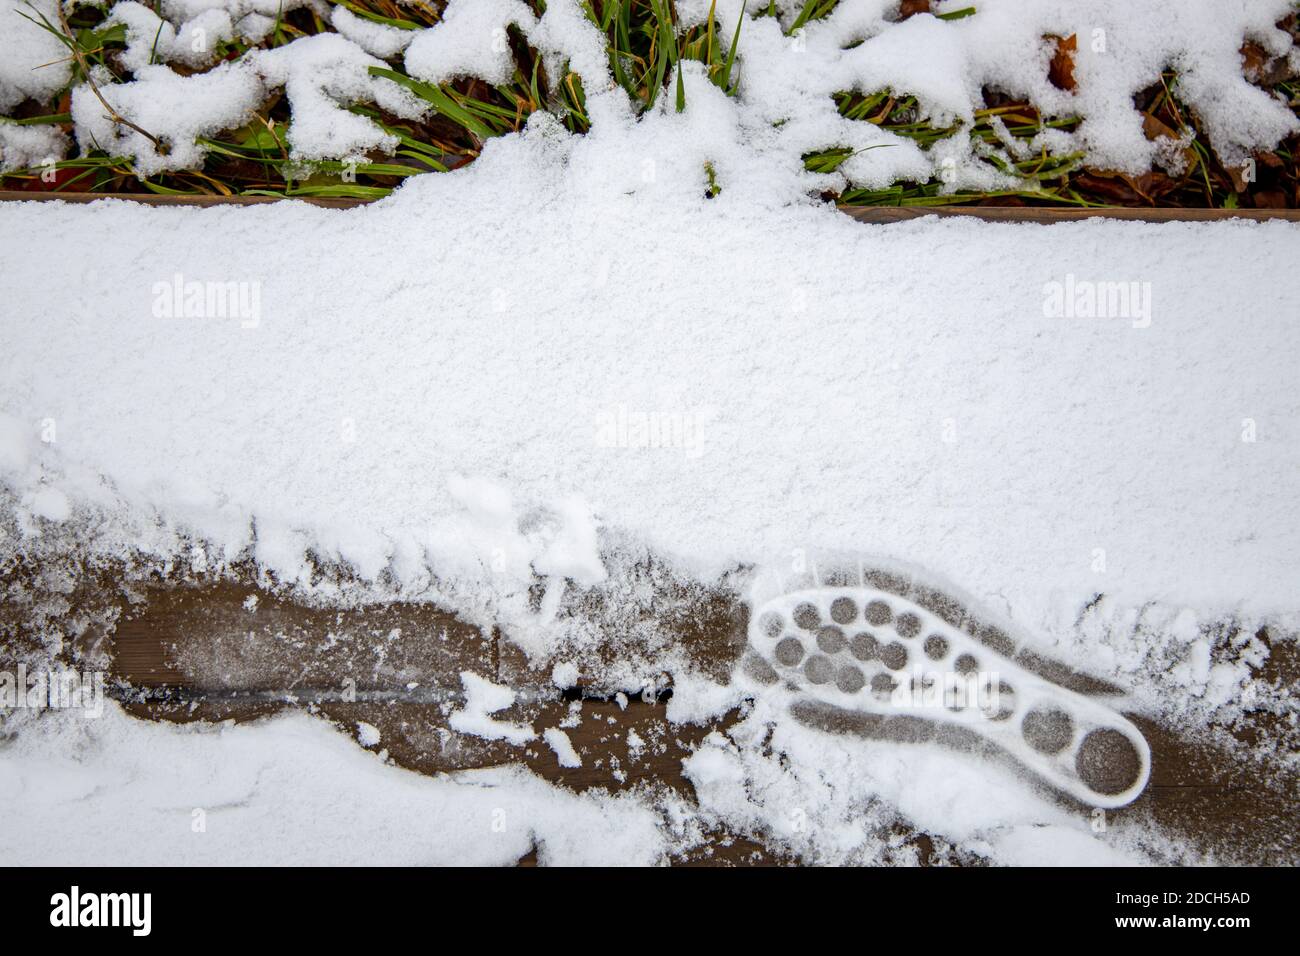 Footprint of shoes on the loose snow Stock Photo